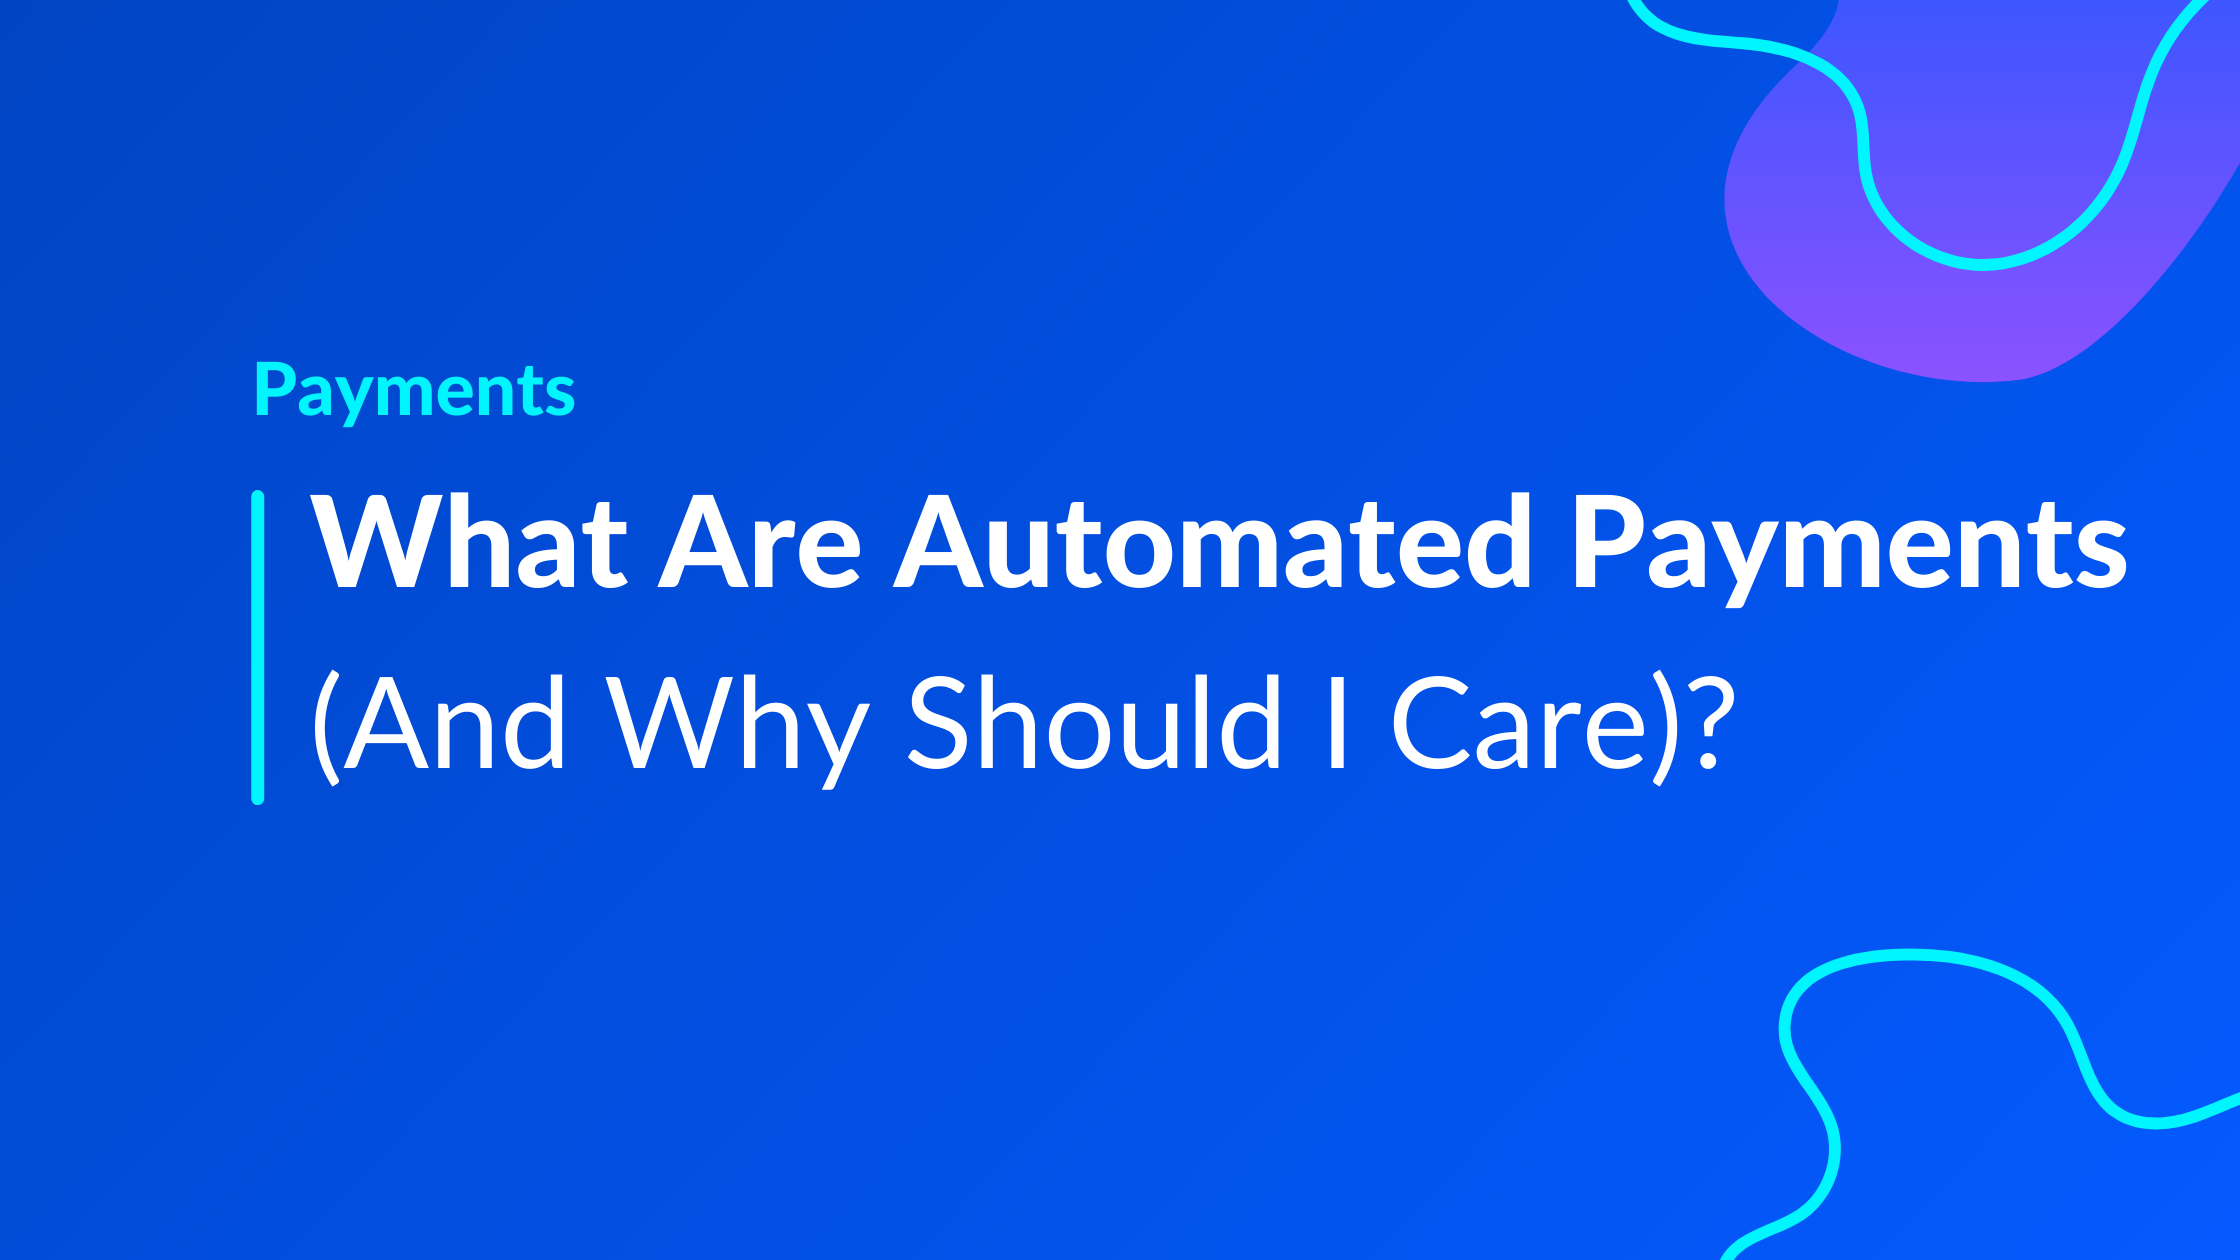 What Are Automated Payments and Why Should I Care?